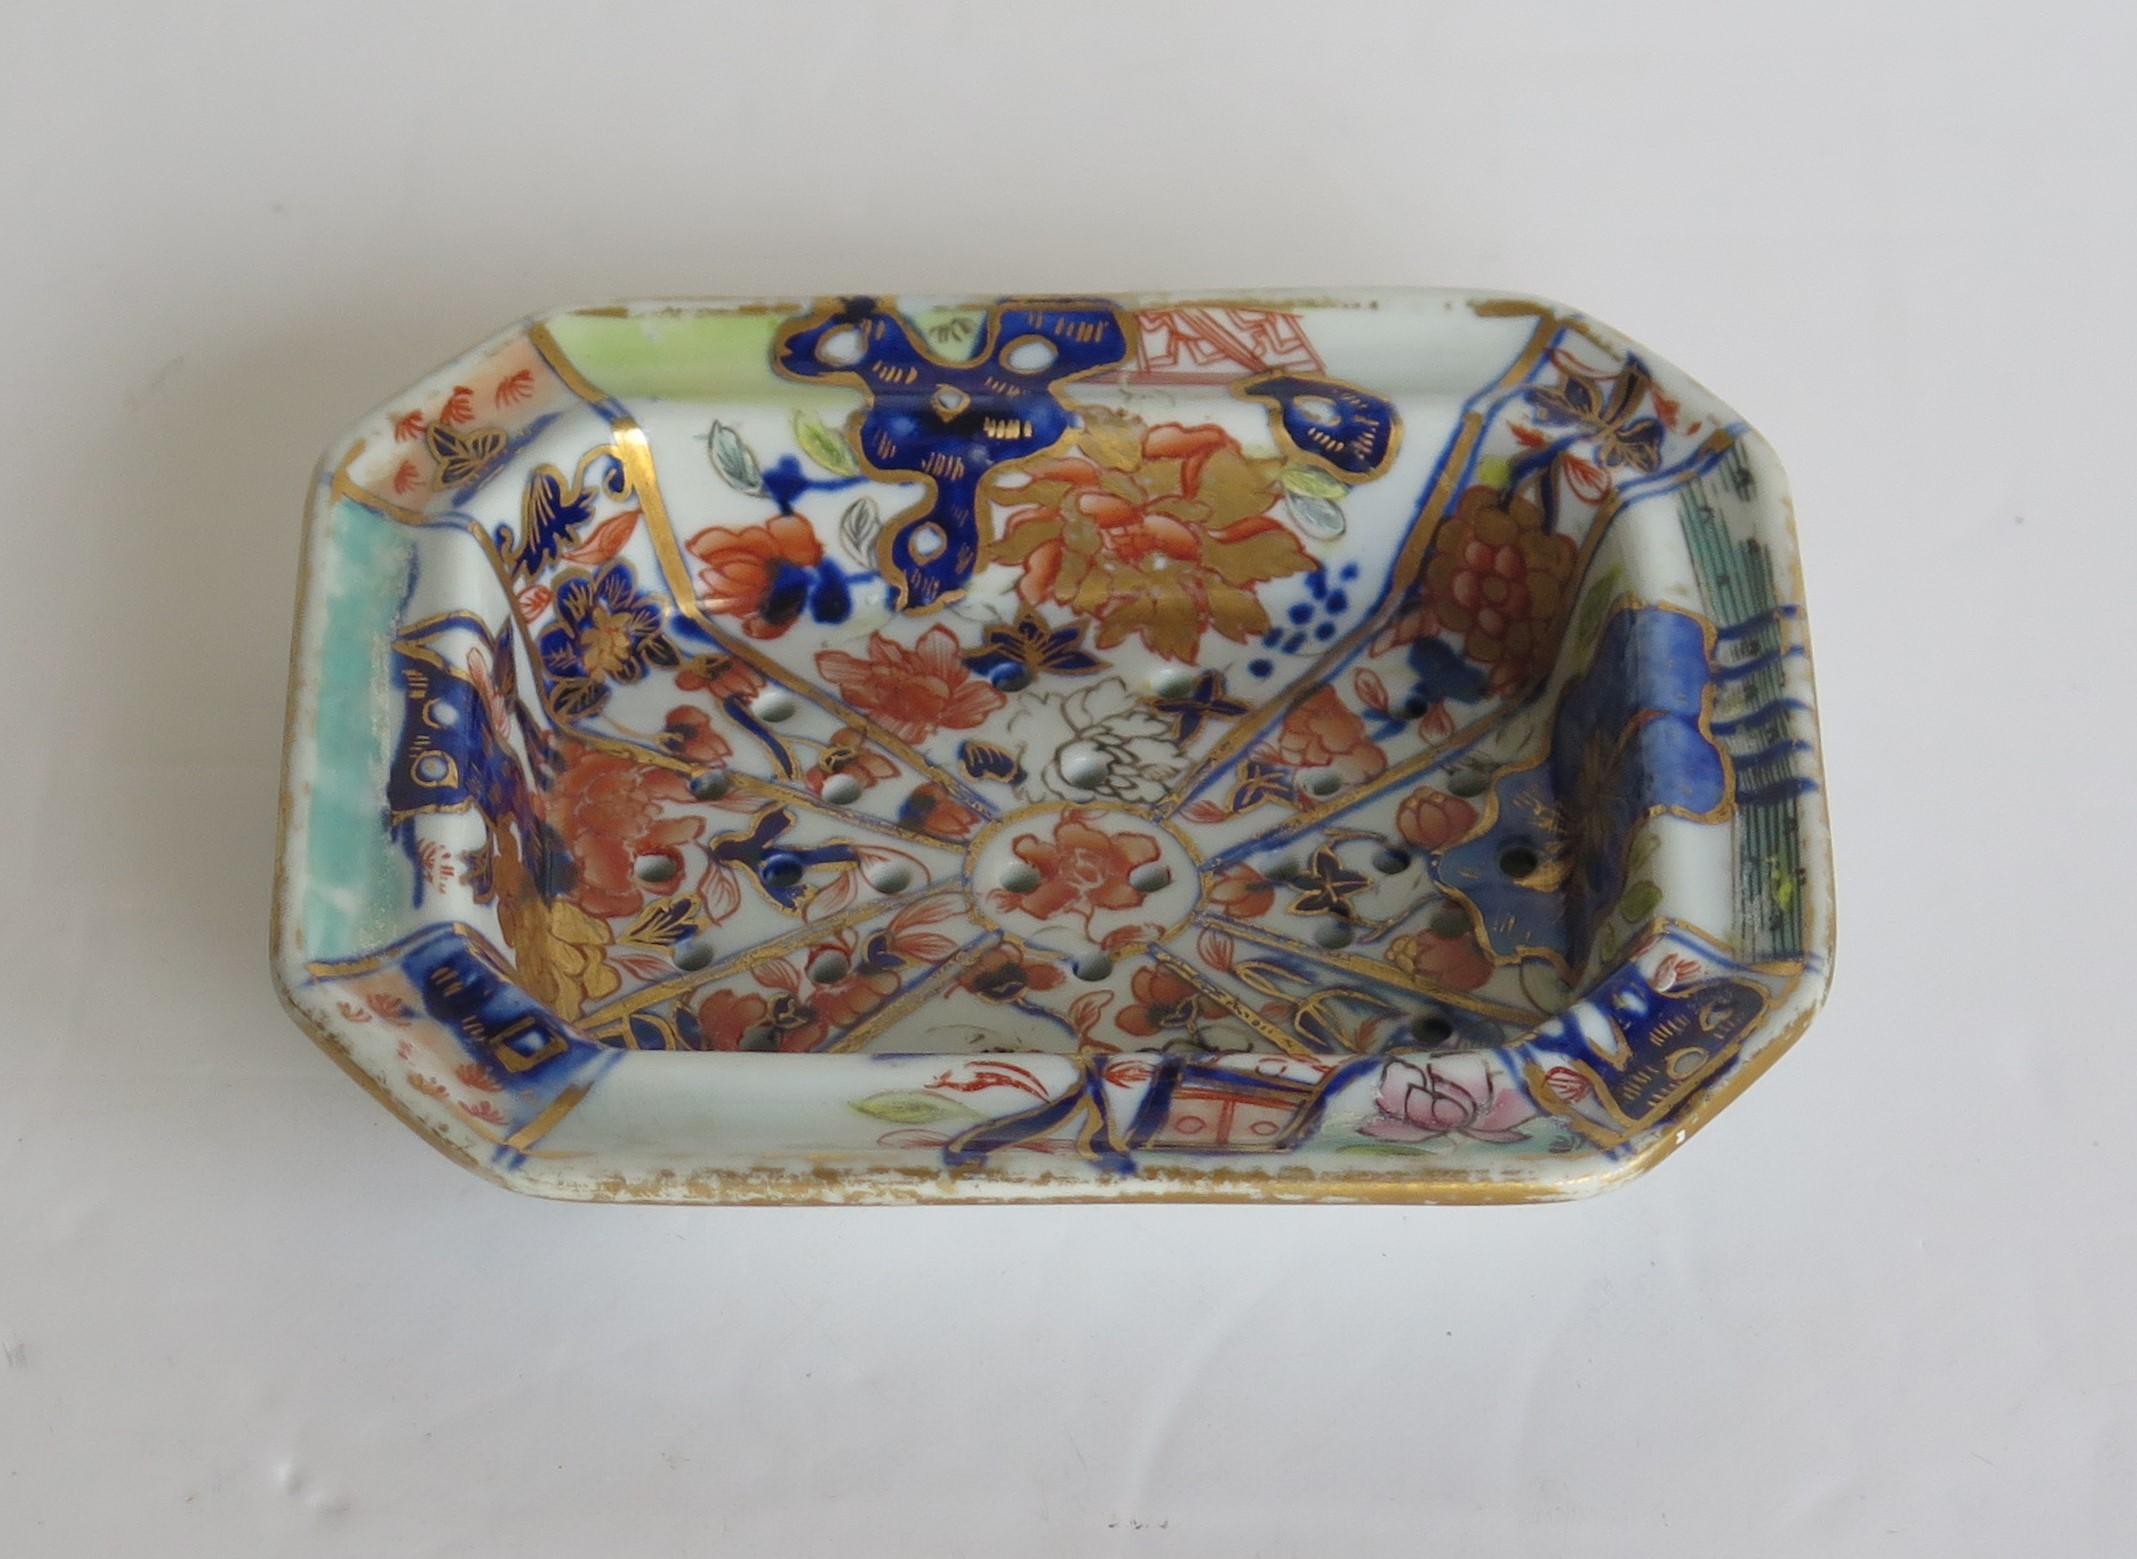 This is a very good soap dish decorated in the Fence, Rock and Gold flower pattern, made by Mason's Ironstone in the early 19th century Georgian period, circa 1813-1820 

Soap Dishes by Mason's Ironstone are rare items and this is a very early